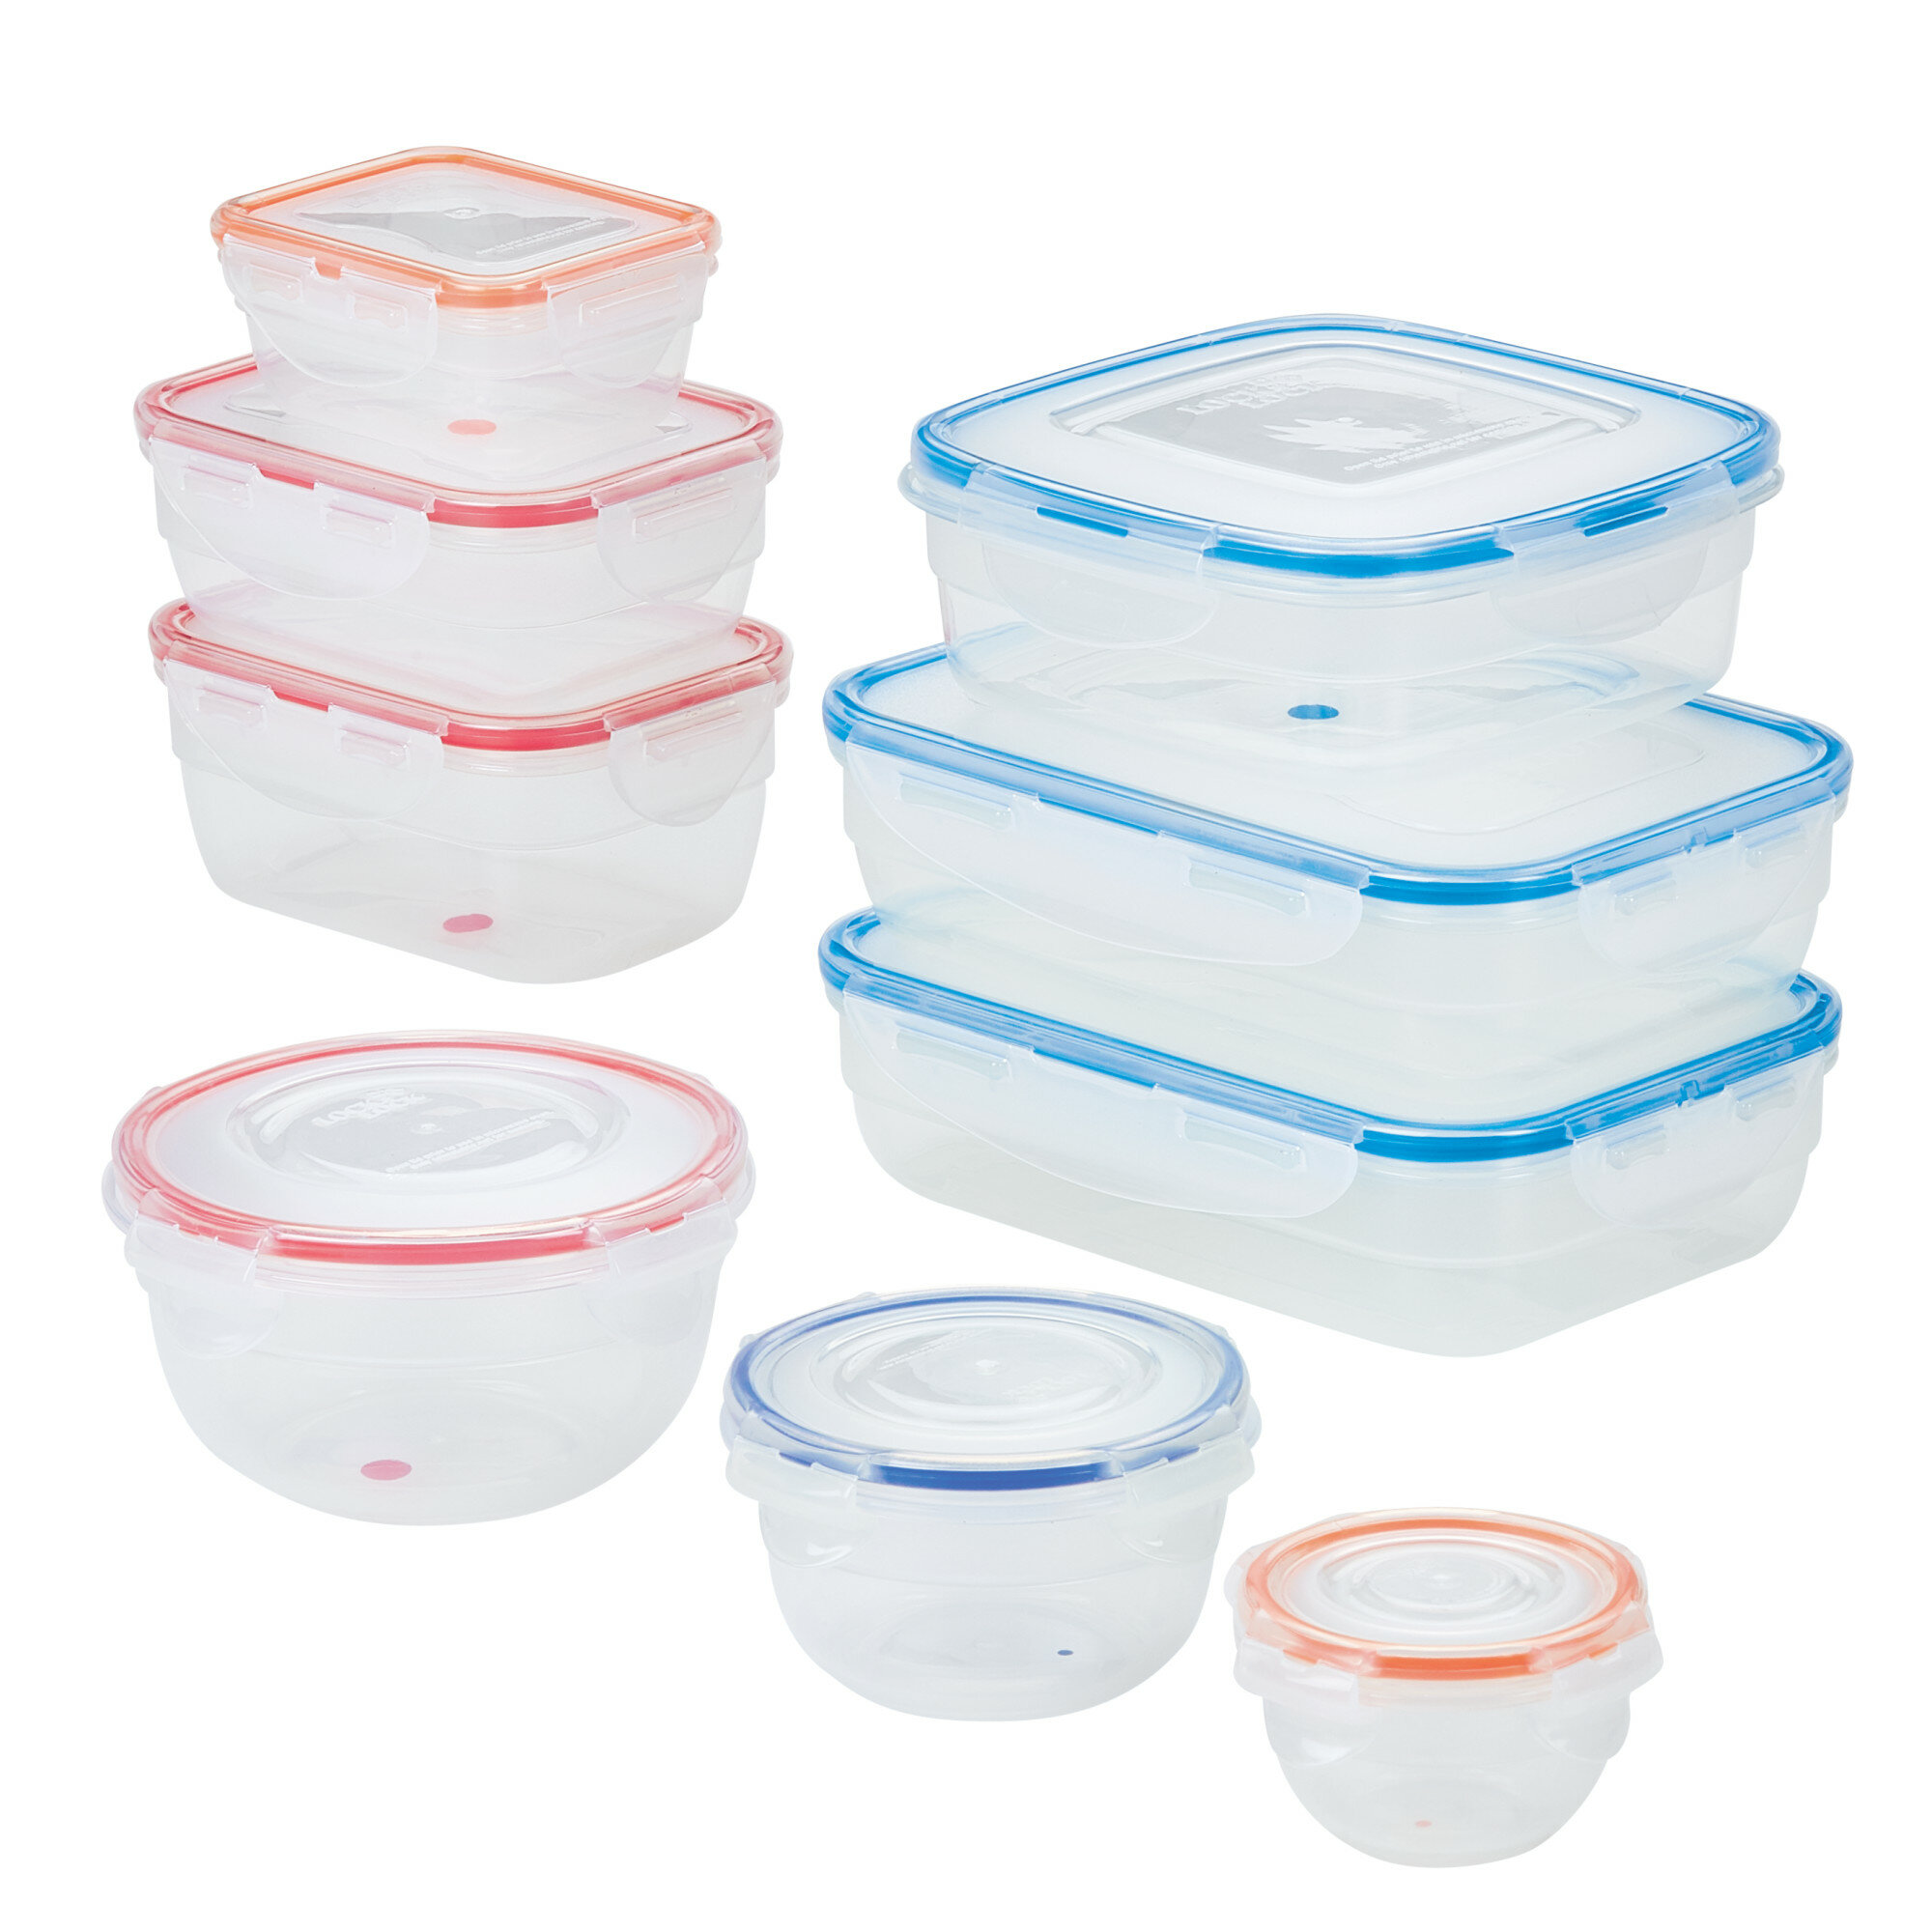 Snapware Total Solution 16-Pc Plastic Food Storage Containers Set , 2-Cup &  1-Cup Round Meal Prep Container, BPA-Free Lids with 4 Locking Tabs